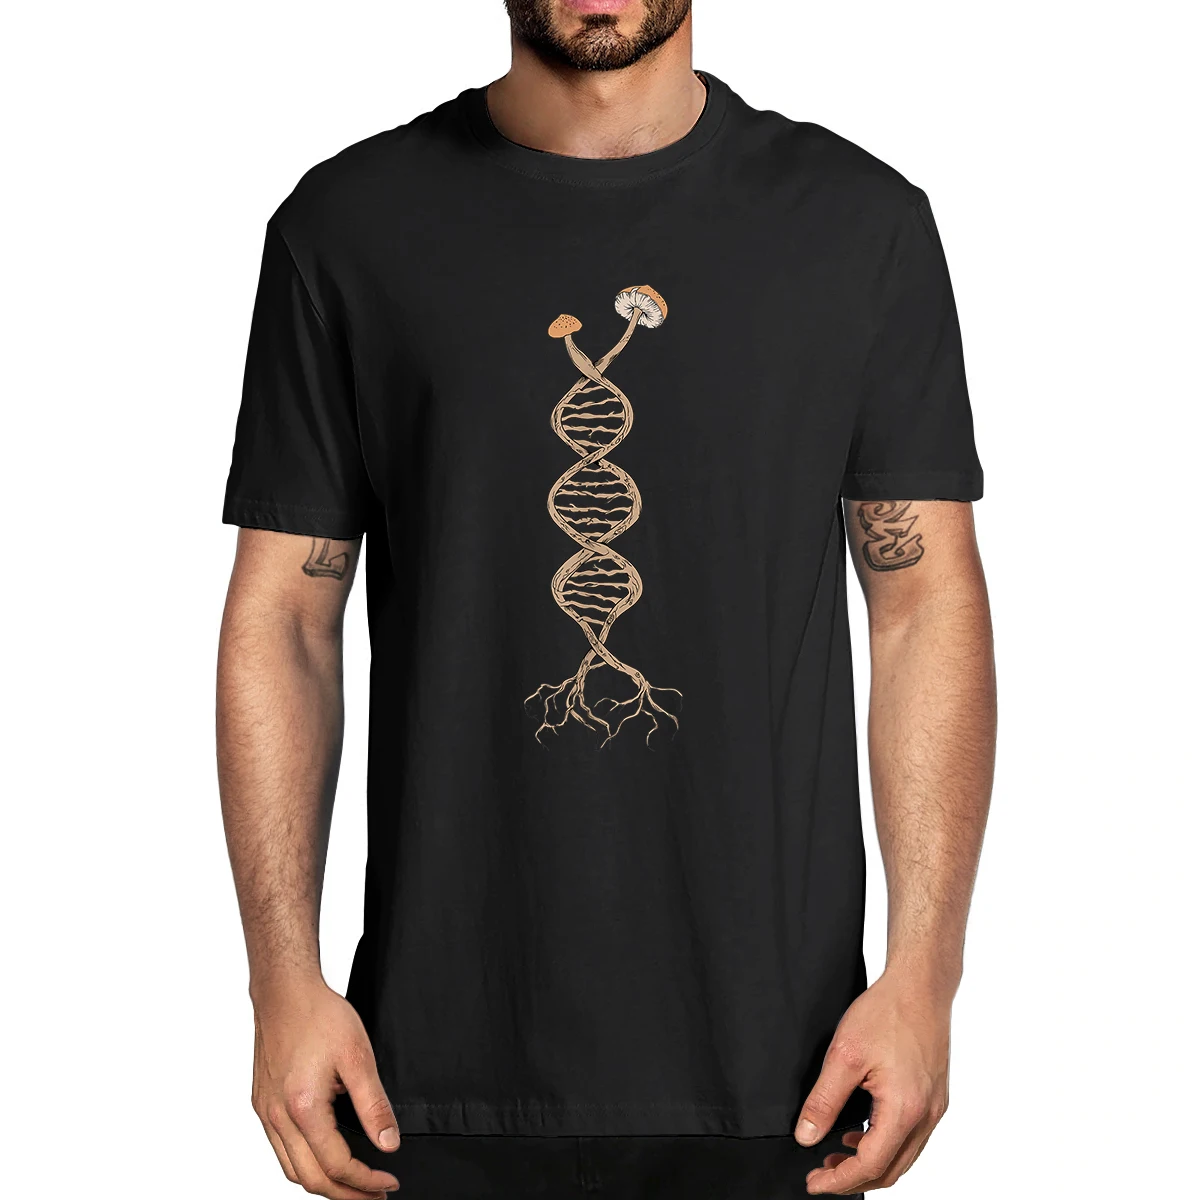 Unisex 100% Cotton Tops Pick Mushrooms is in my DNA Shroom Mycology Fungi Foraging Summer Men Novelty T-Shirt Women Casual Tee